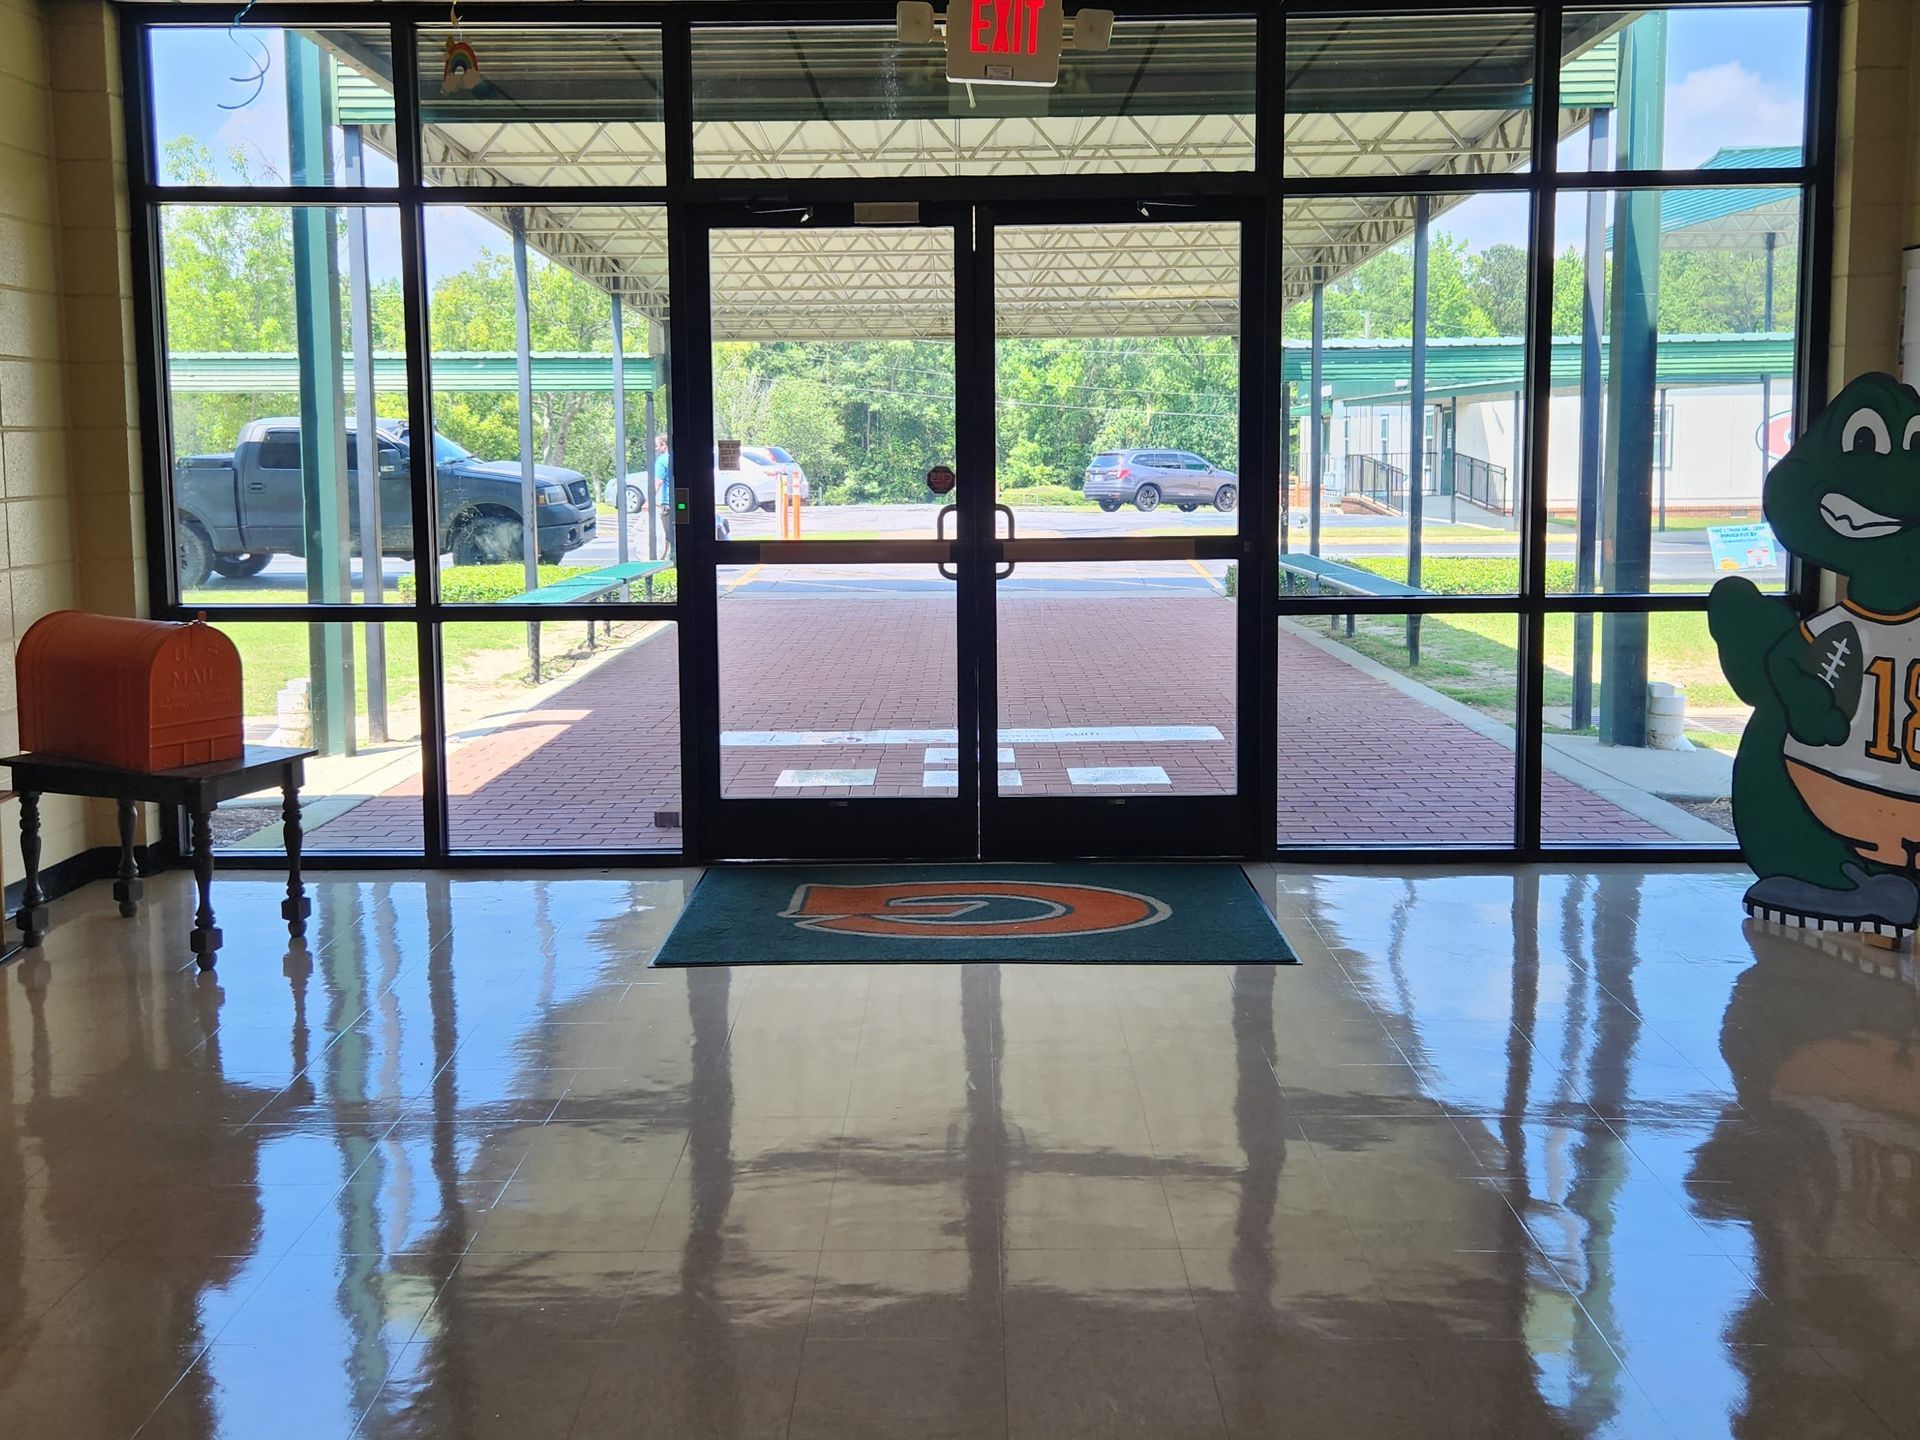 Security tint Auburn Opelika Smiths Station AL - the school is protected from an armed break-in or forced entry. Additionally Solar Heat gain and Sun glare was cut adding comfort with visual clarity inside.